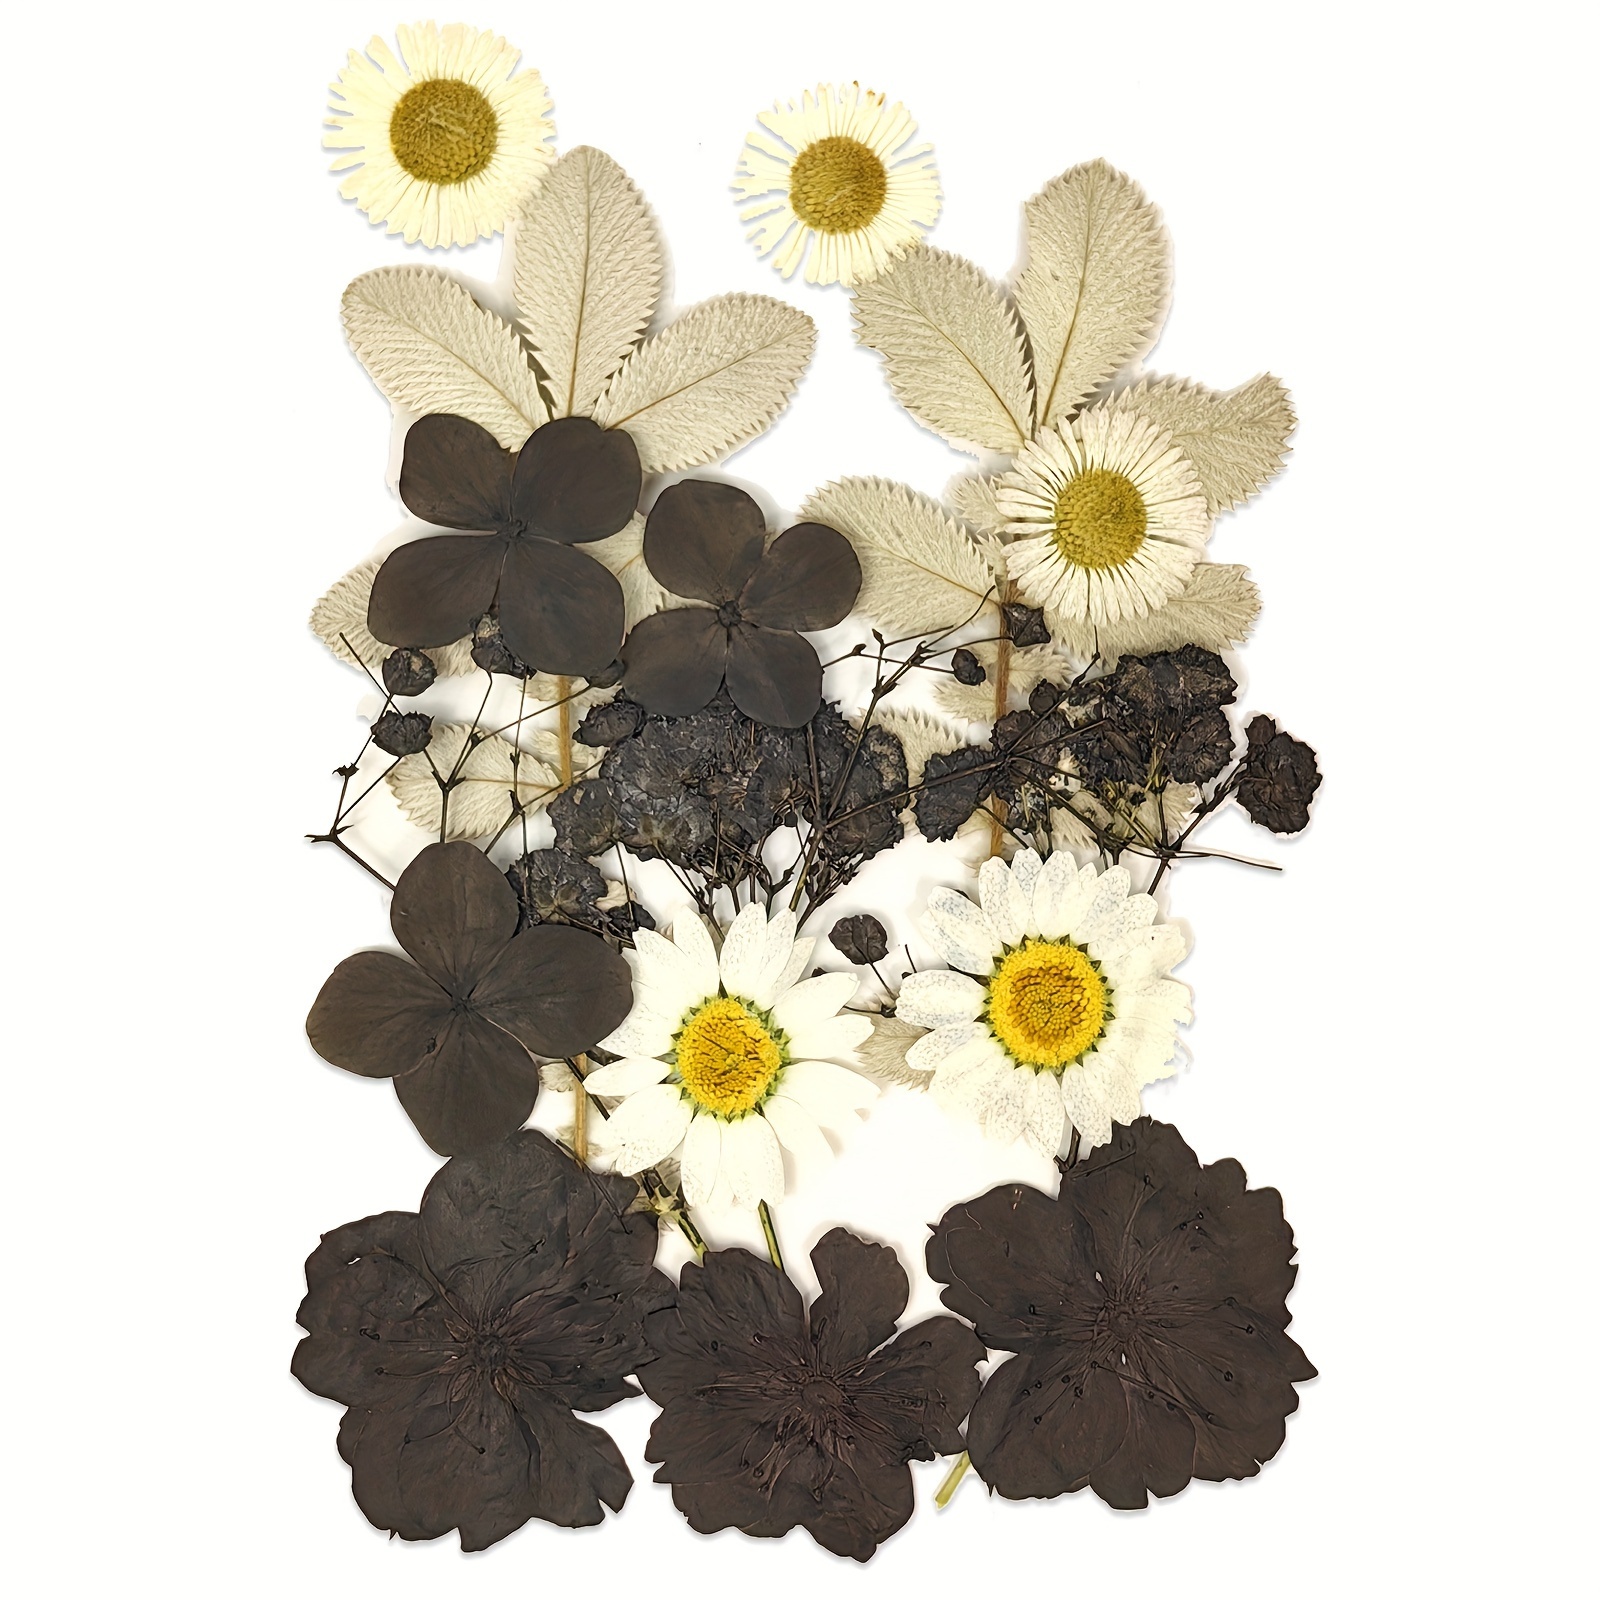 Pressed Daisies Bulk Dried Flowers for Resin, Soaps, Candles, Aromatherapy,  and Food Decor Dried Daisy Flowers P 